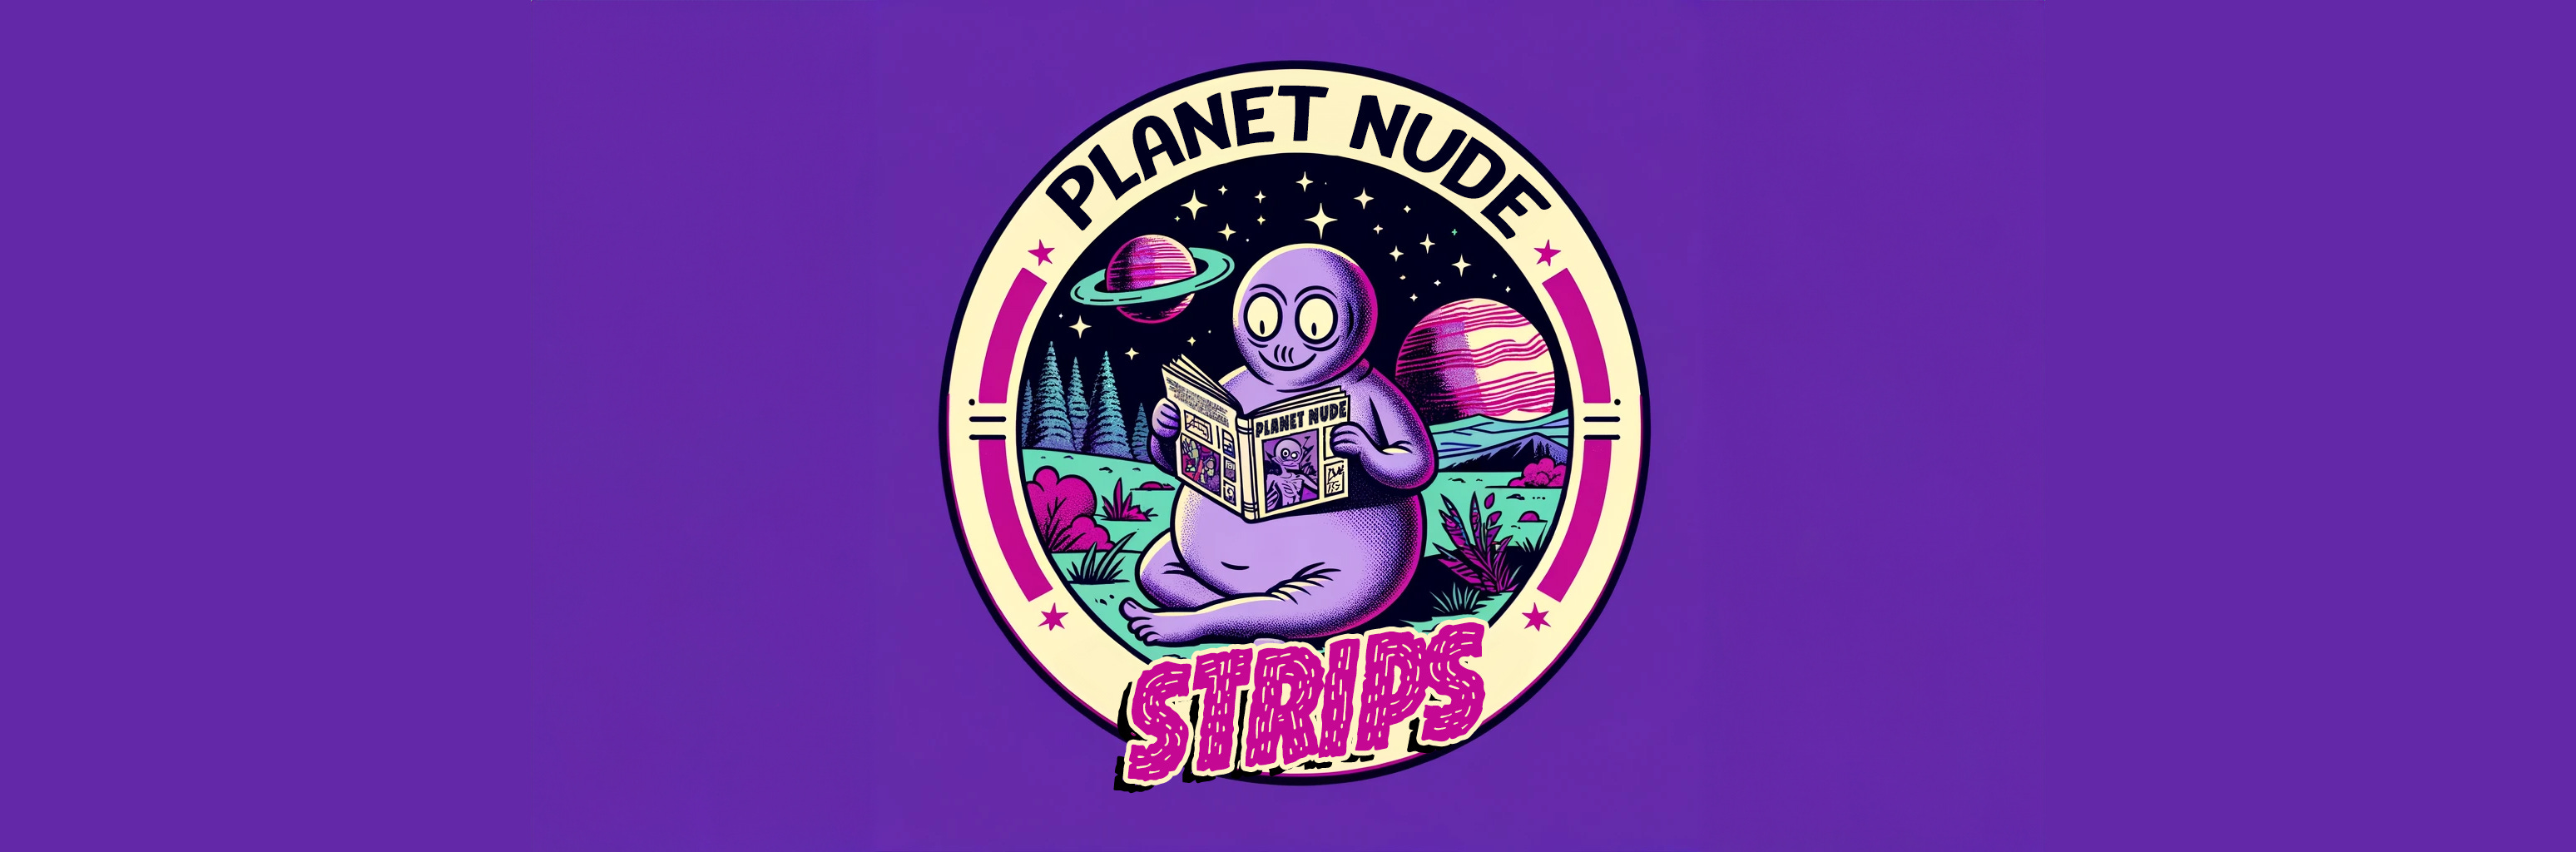 Planet Nude Strips